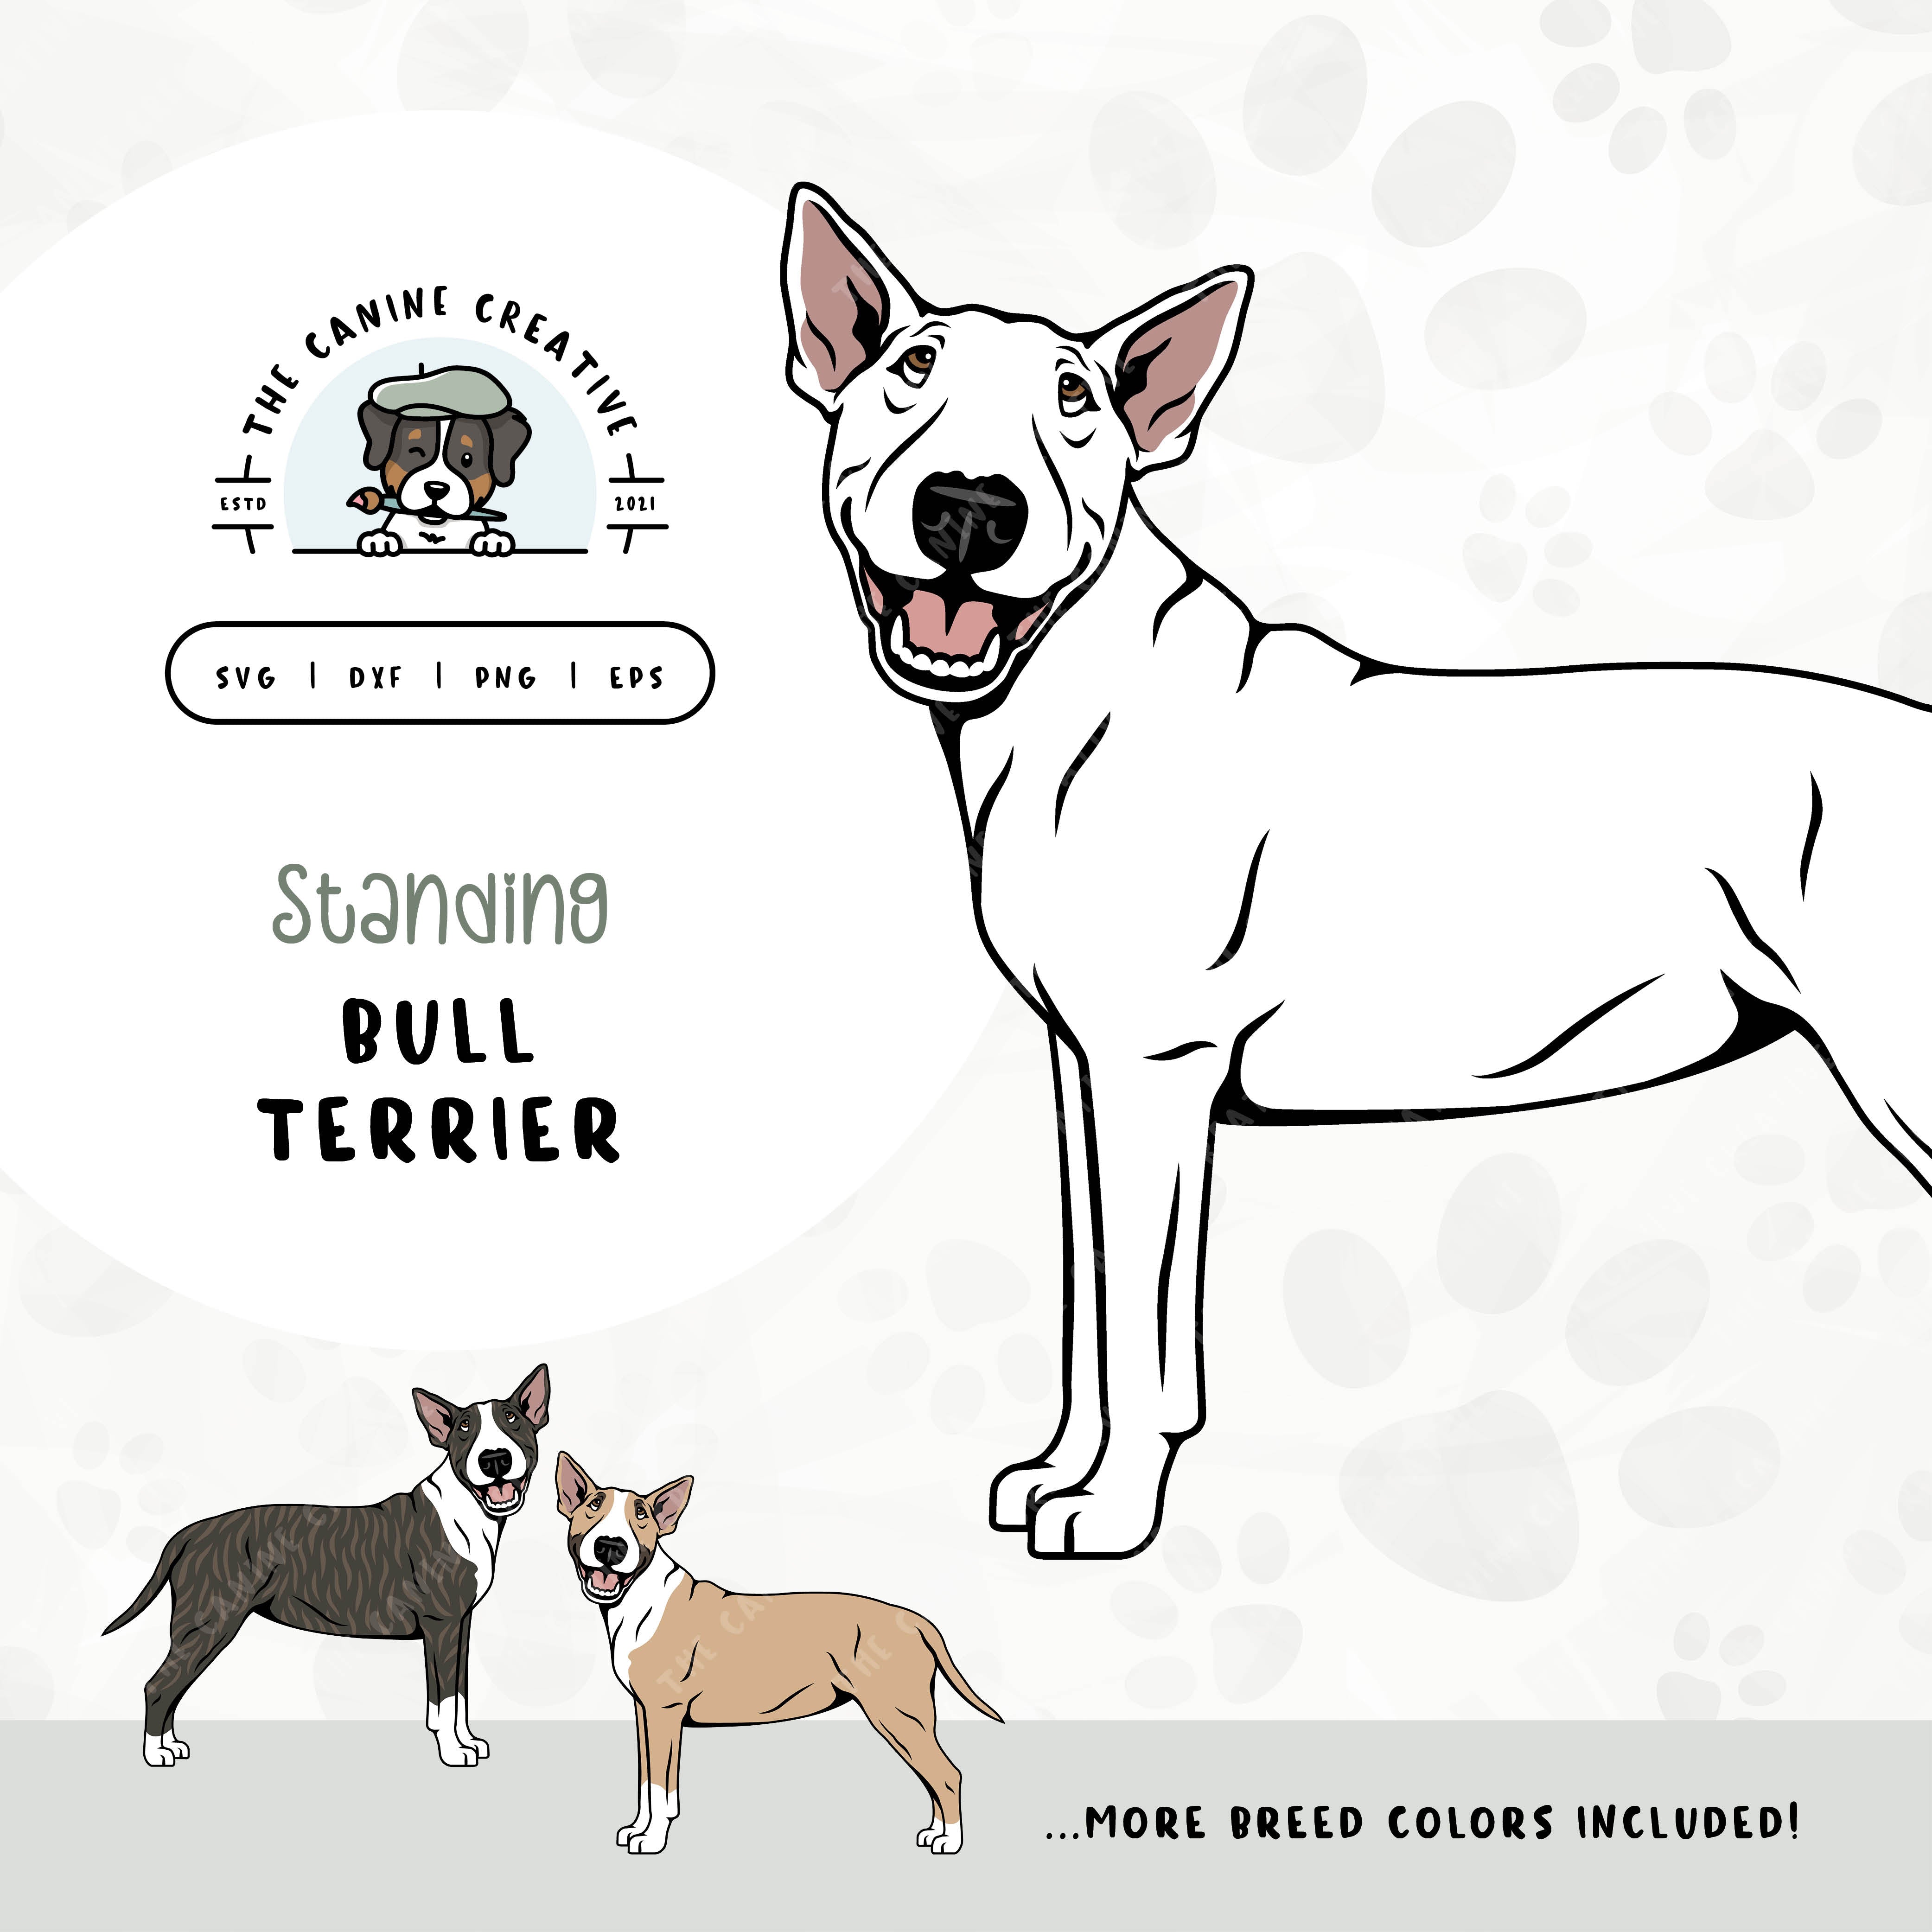 This standing dog design features a Bull Terrier. File formats include: SVG, DXF, PNG, and EPS.